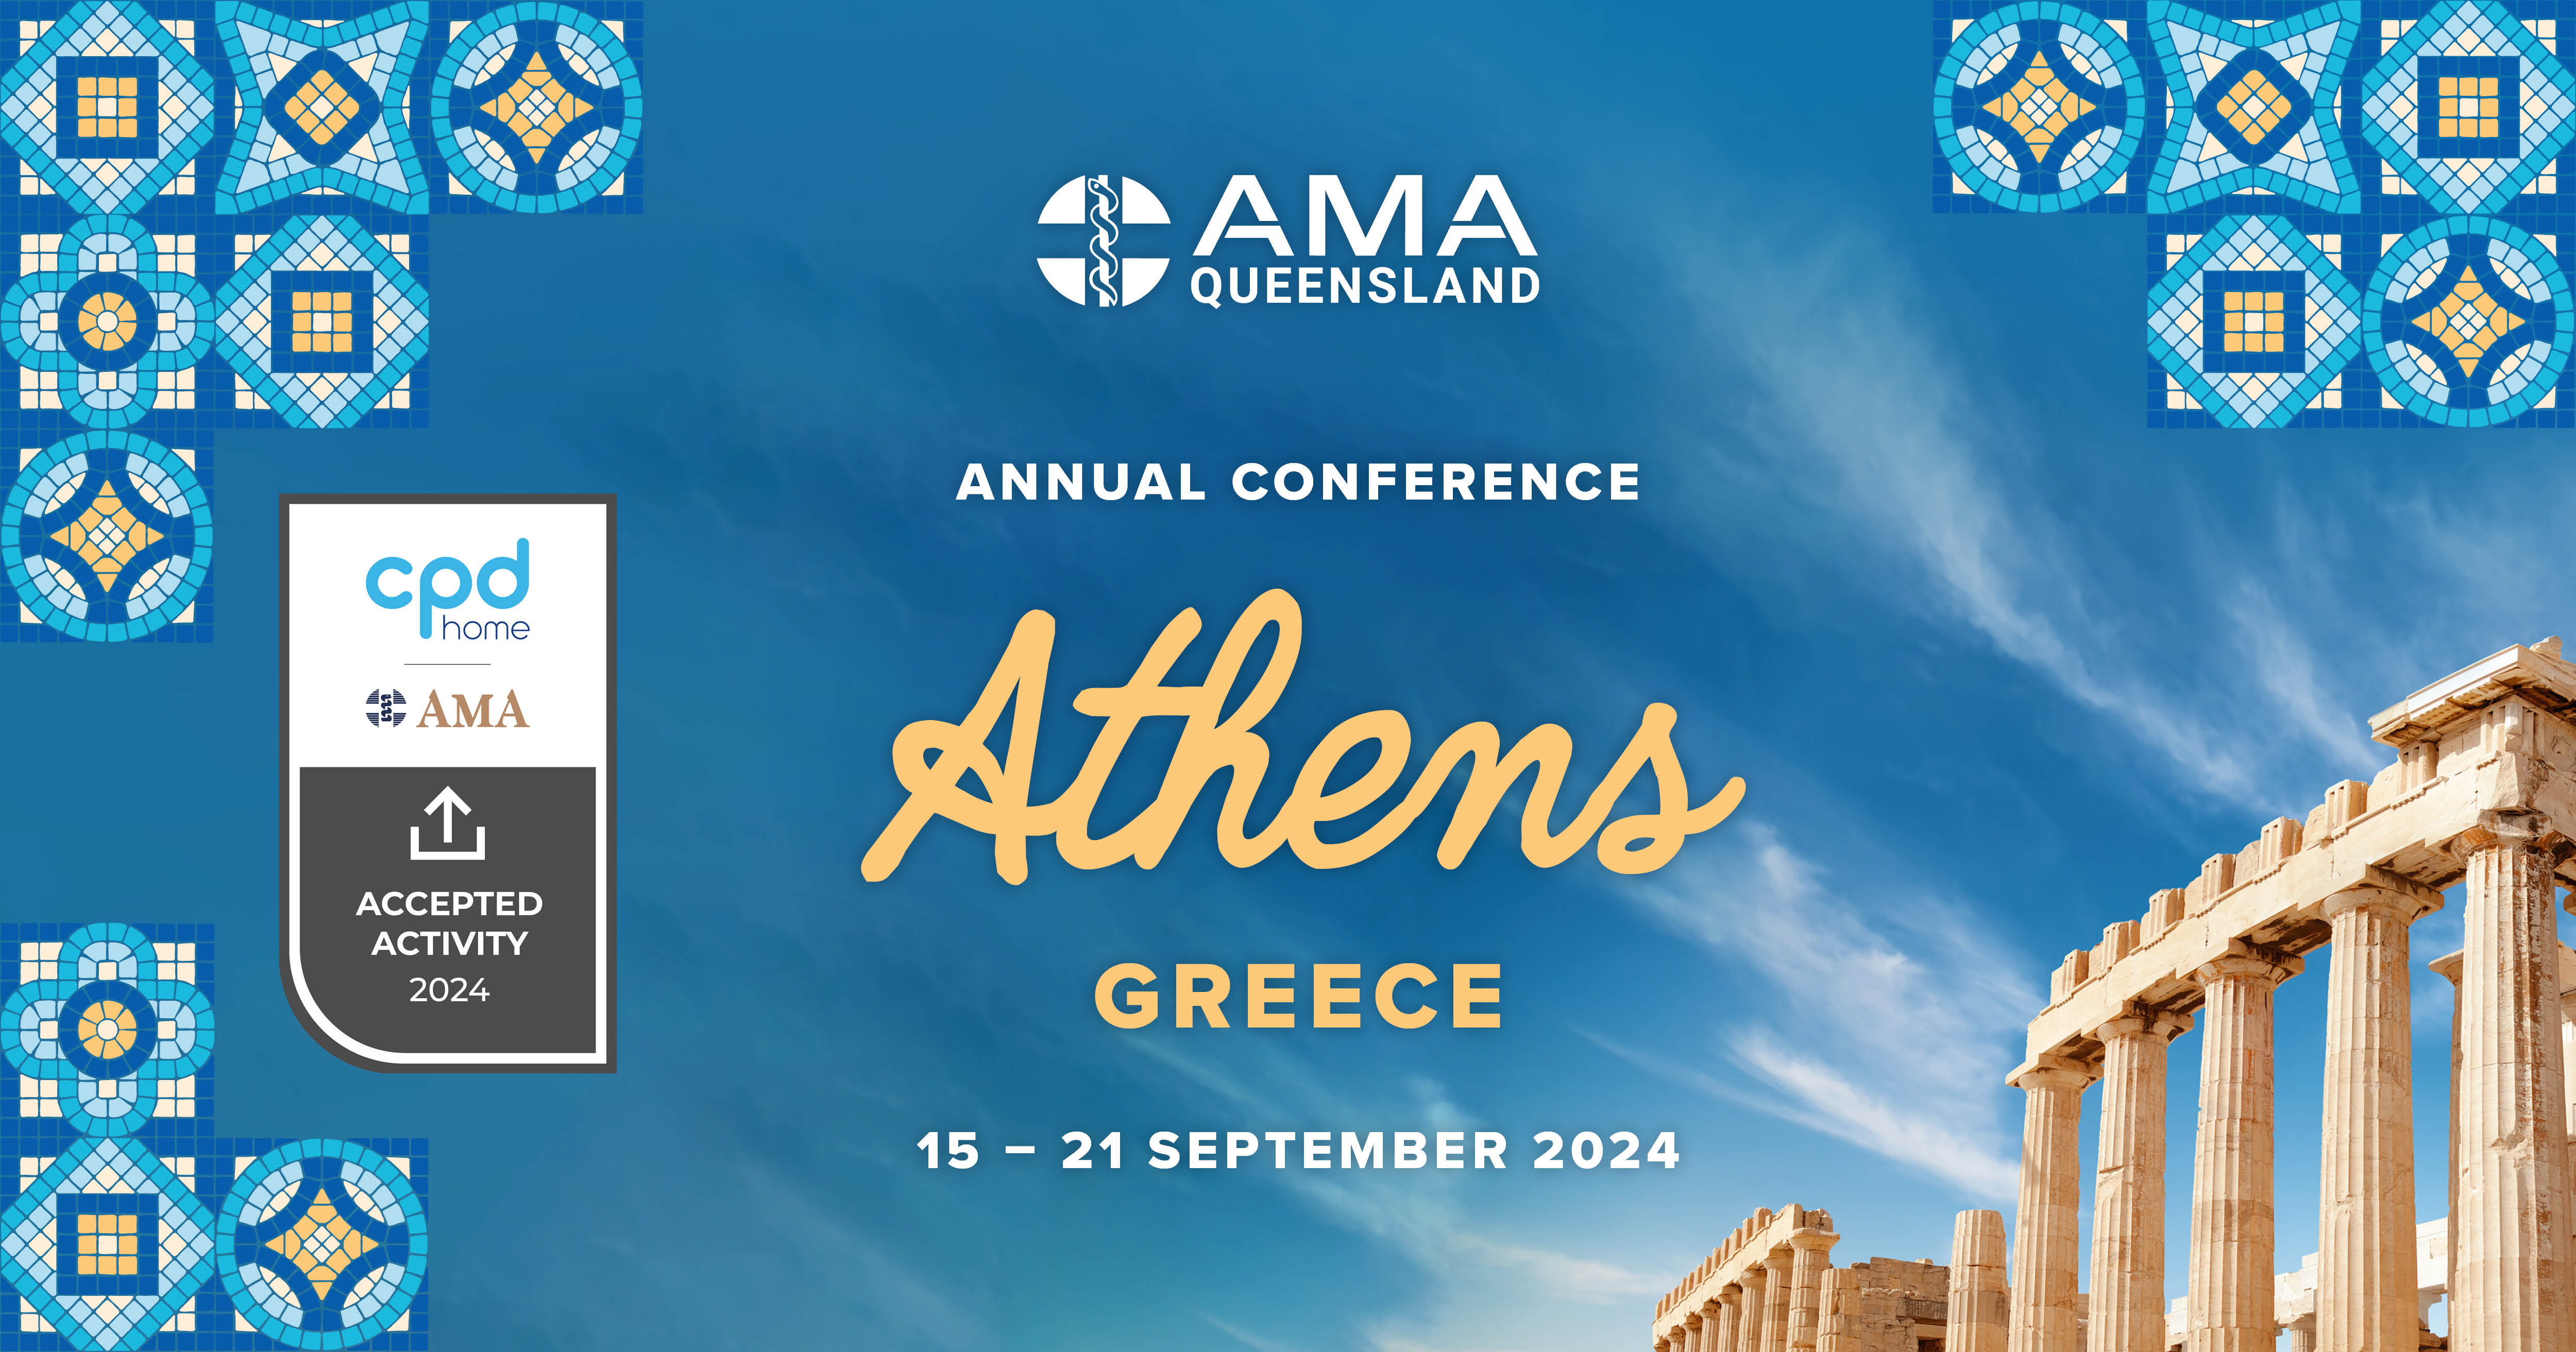 2024 Annual Conference Athens